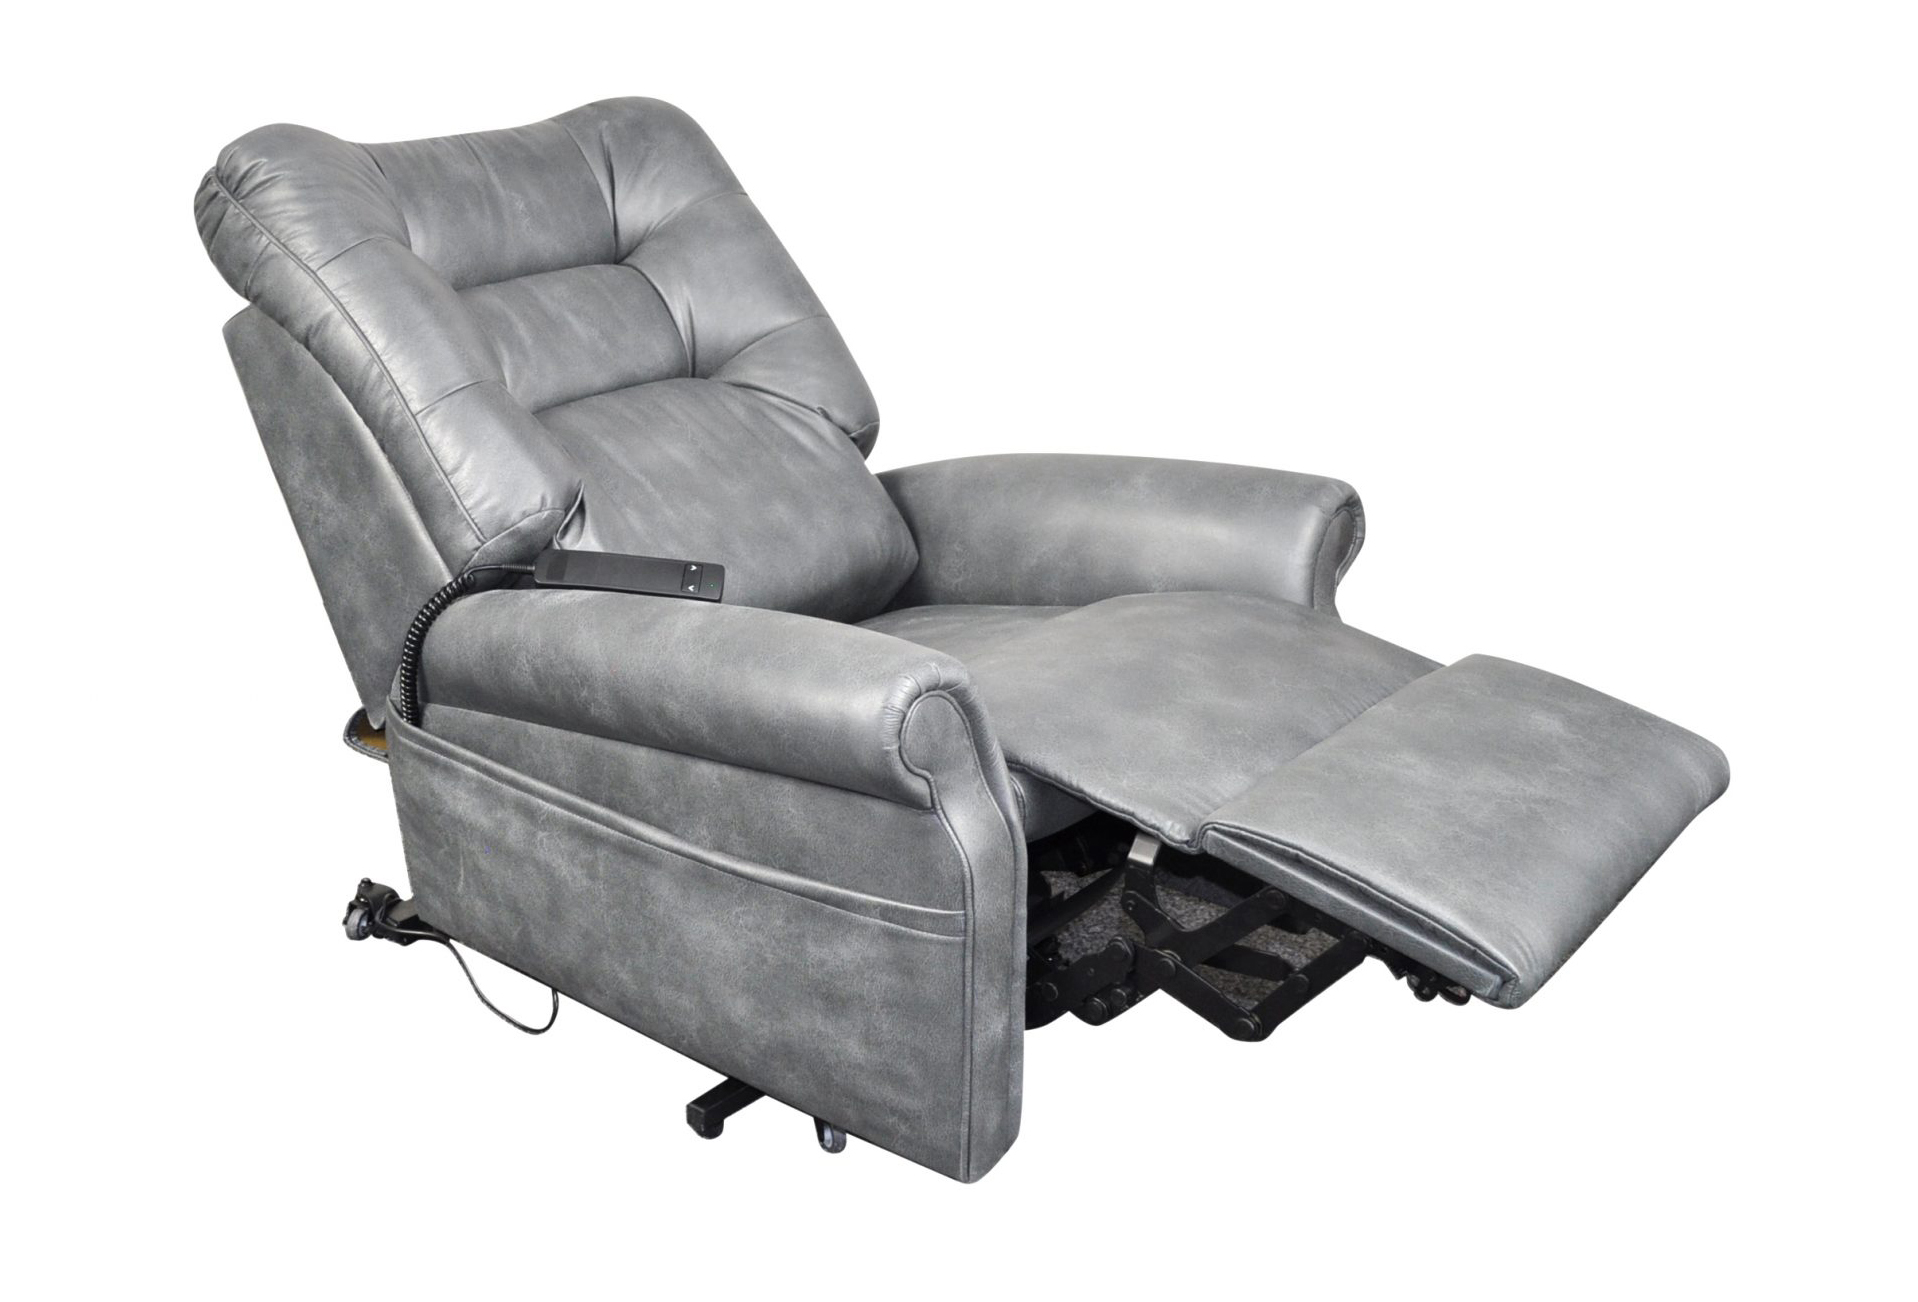 Bluesky Mobility Brando – Wallglider Lift Recliner Chair (Large)